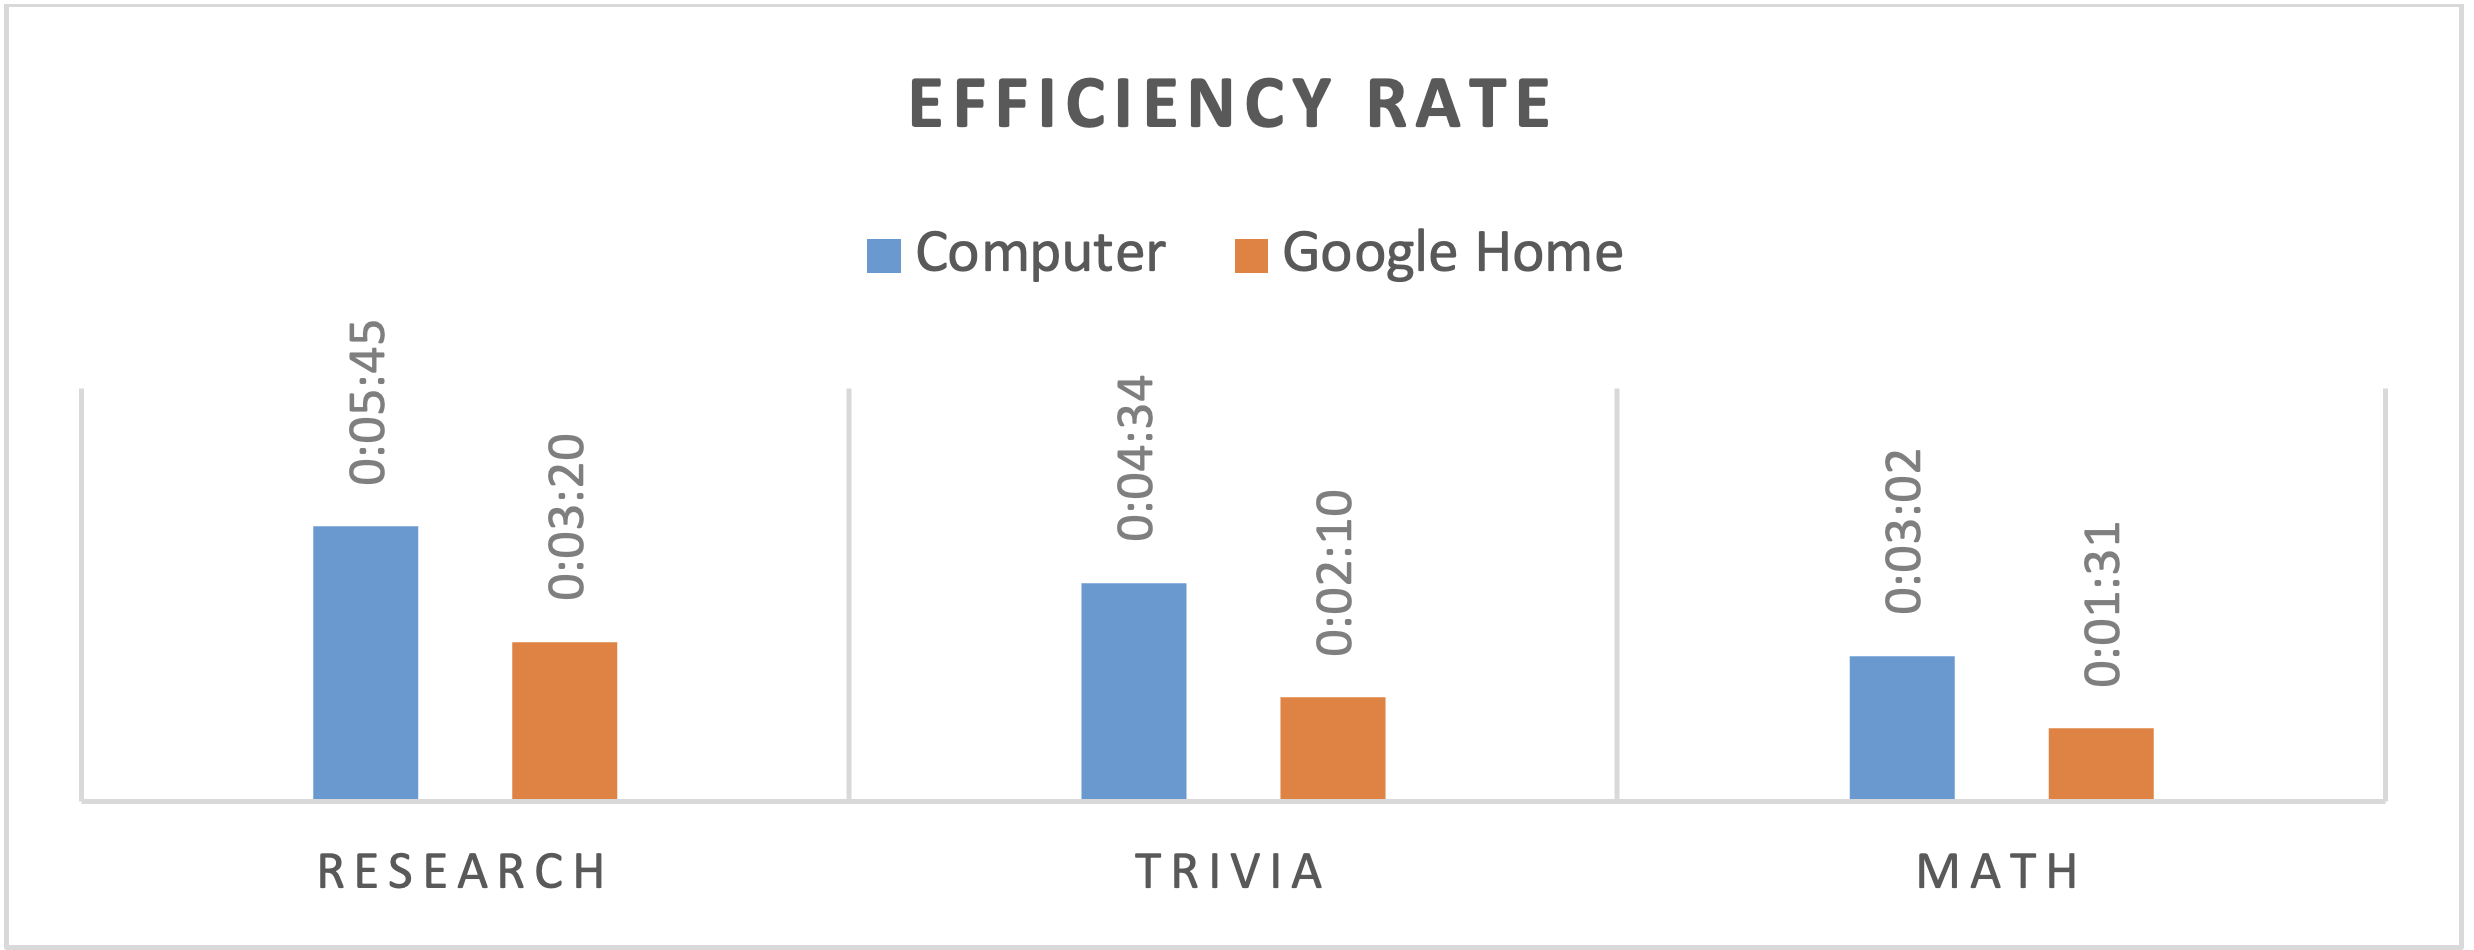 Bar chart of faster efficiency rate and average completion time for each category (research, trivia, and mathematics) of Google Home over desktop computers.